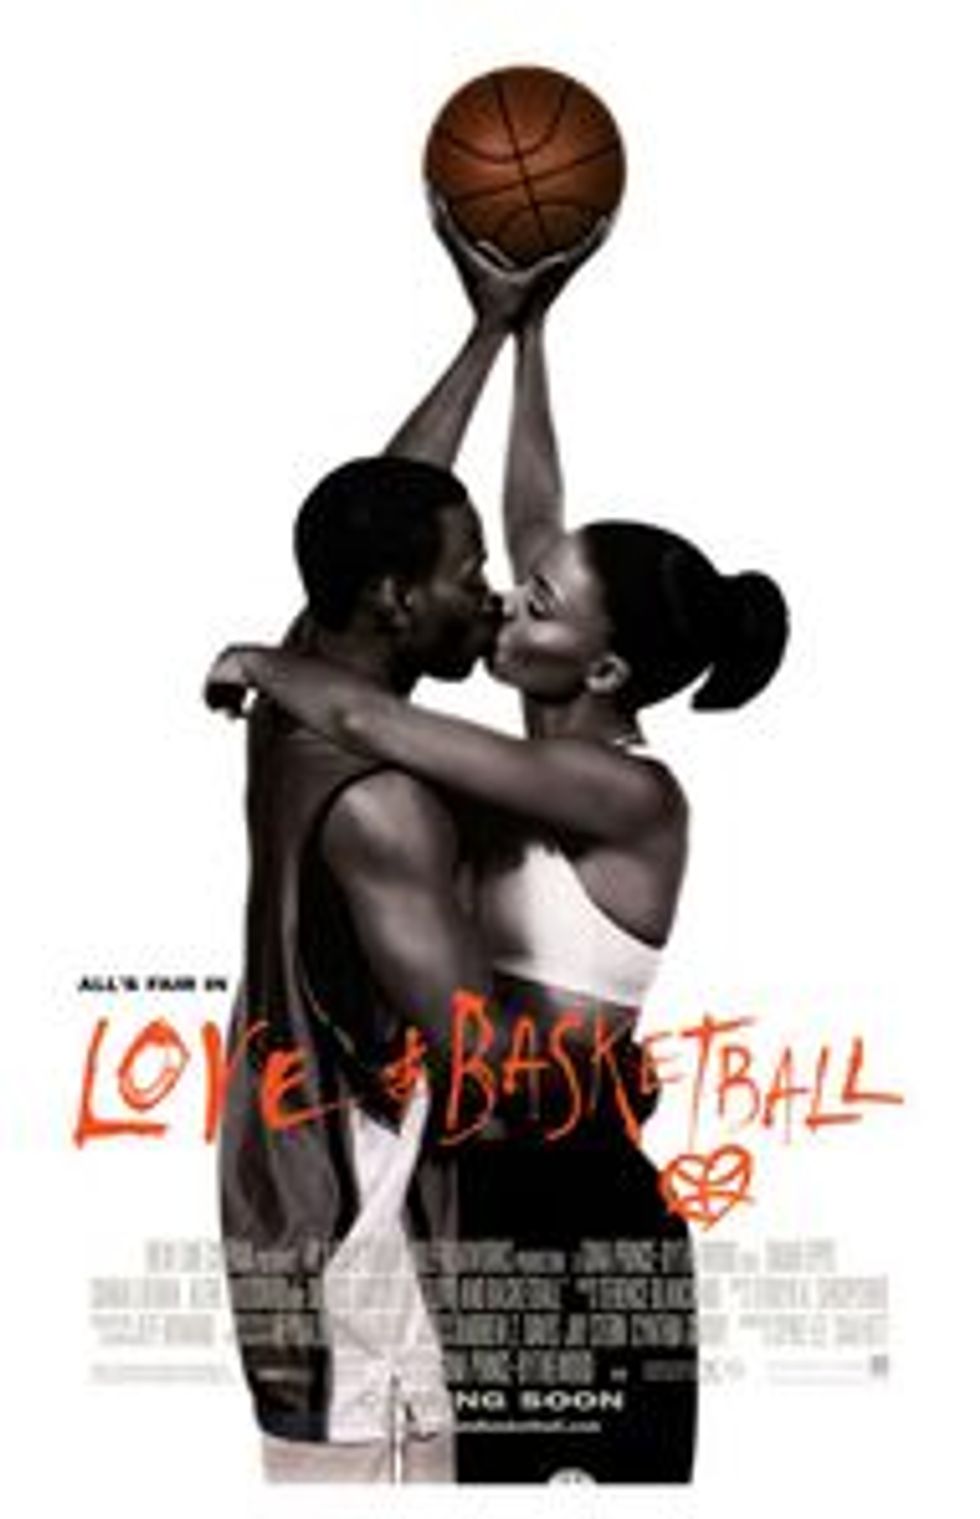 6 Life Lessons From The Movie Love & Basketball